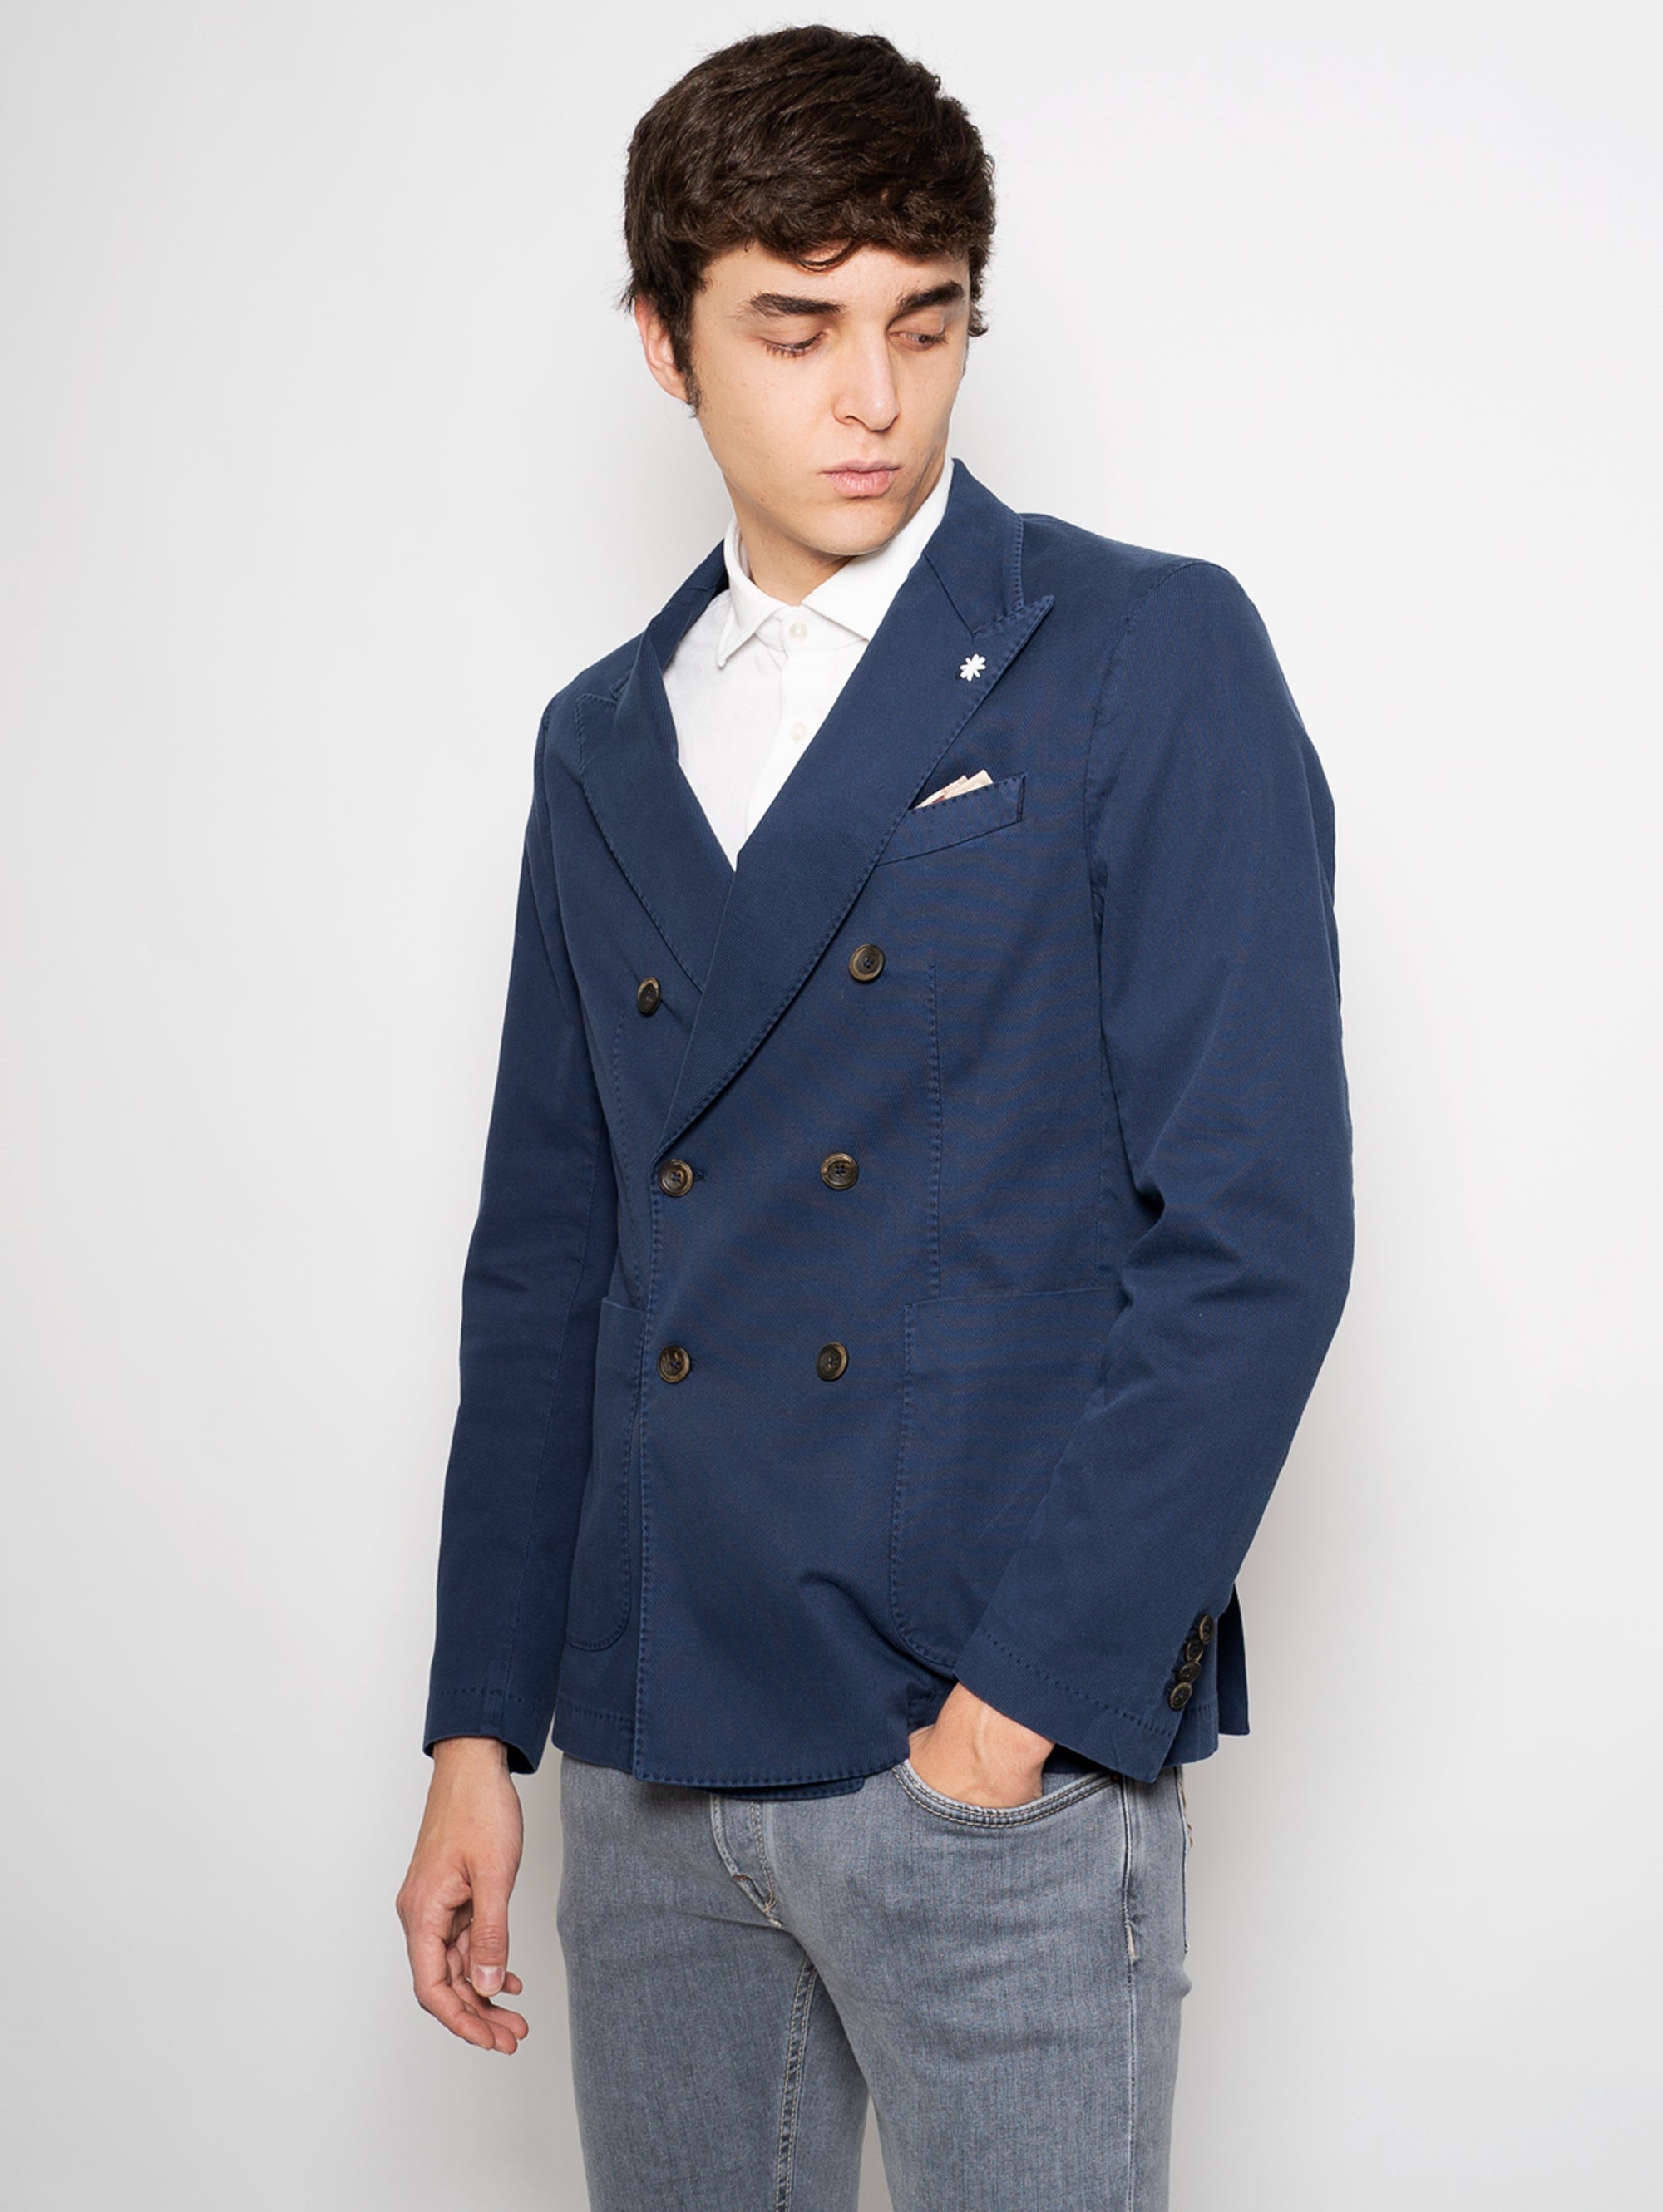 Double-Breasted Jacket in Blue Woven Cotton